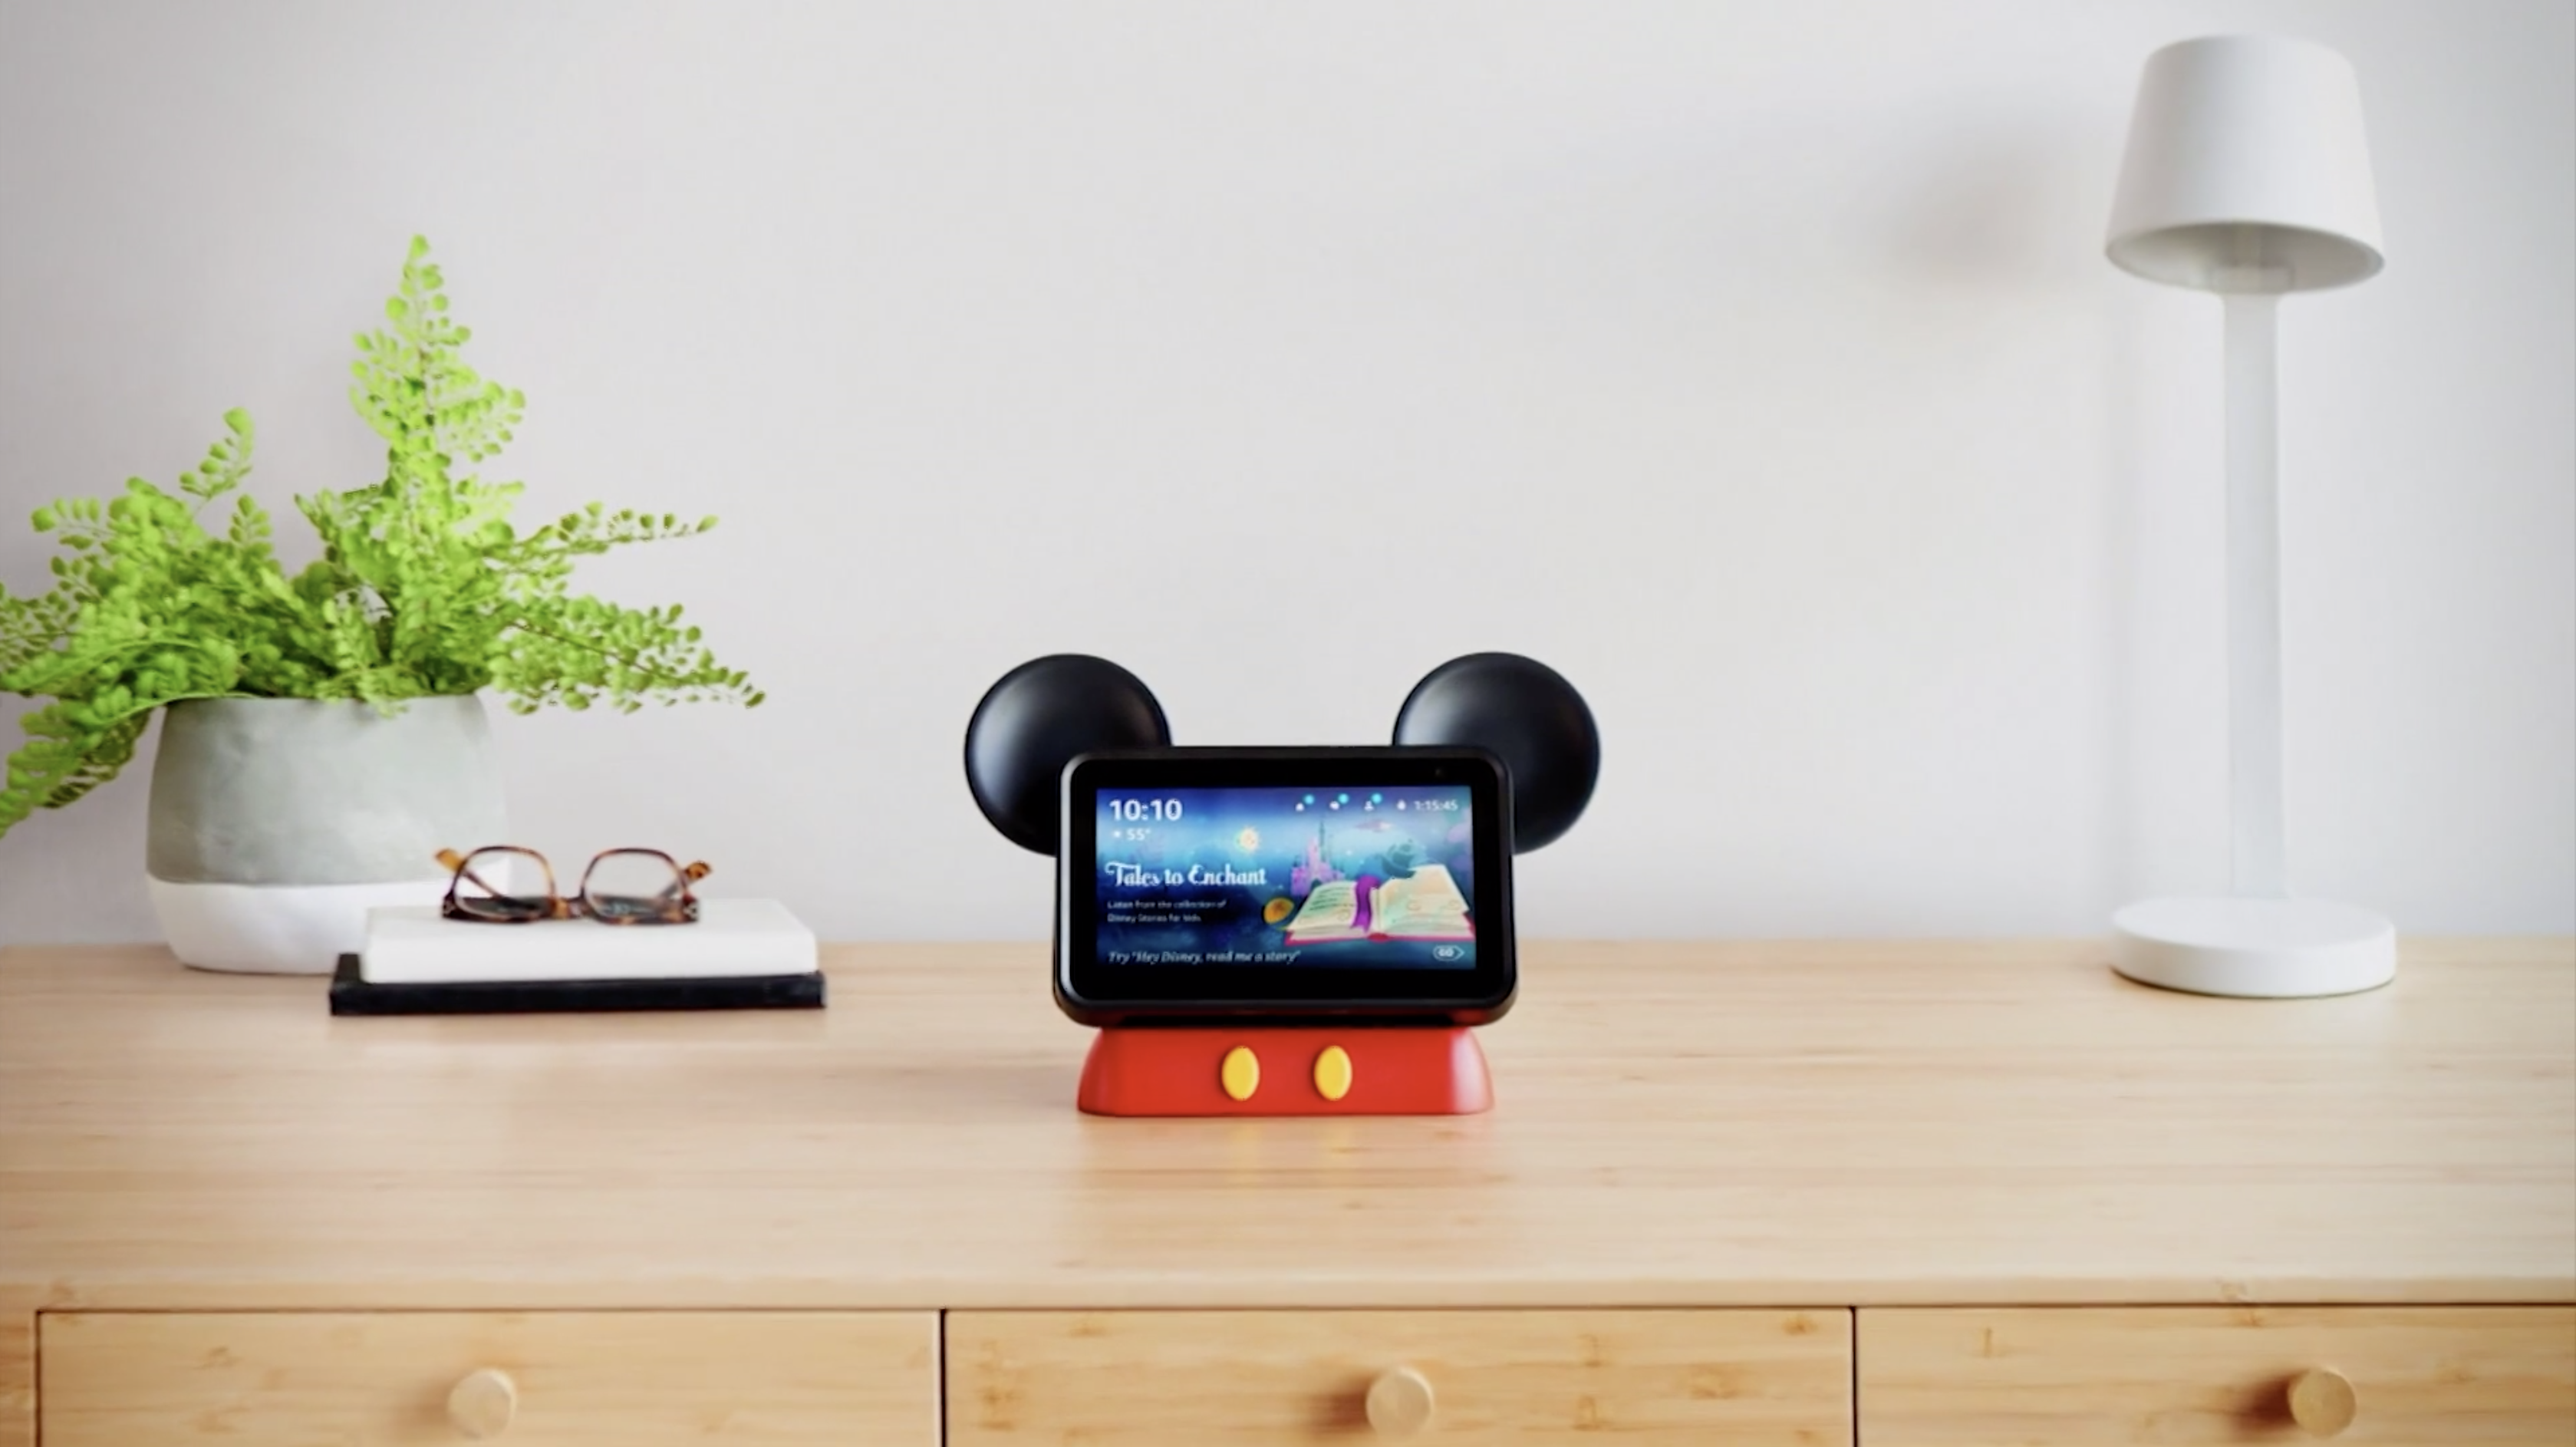 The Mickey-inspired stand was displayed at the Amazon event at the Echo Show 5 booth